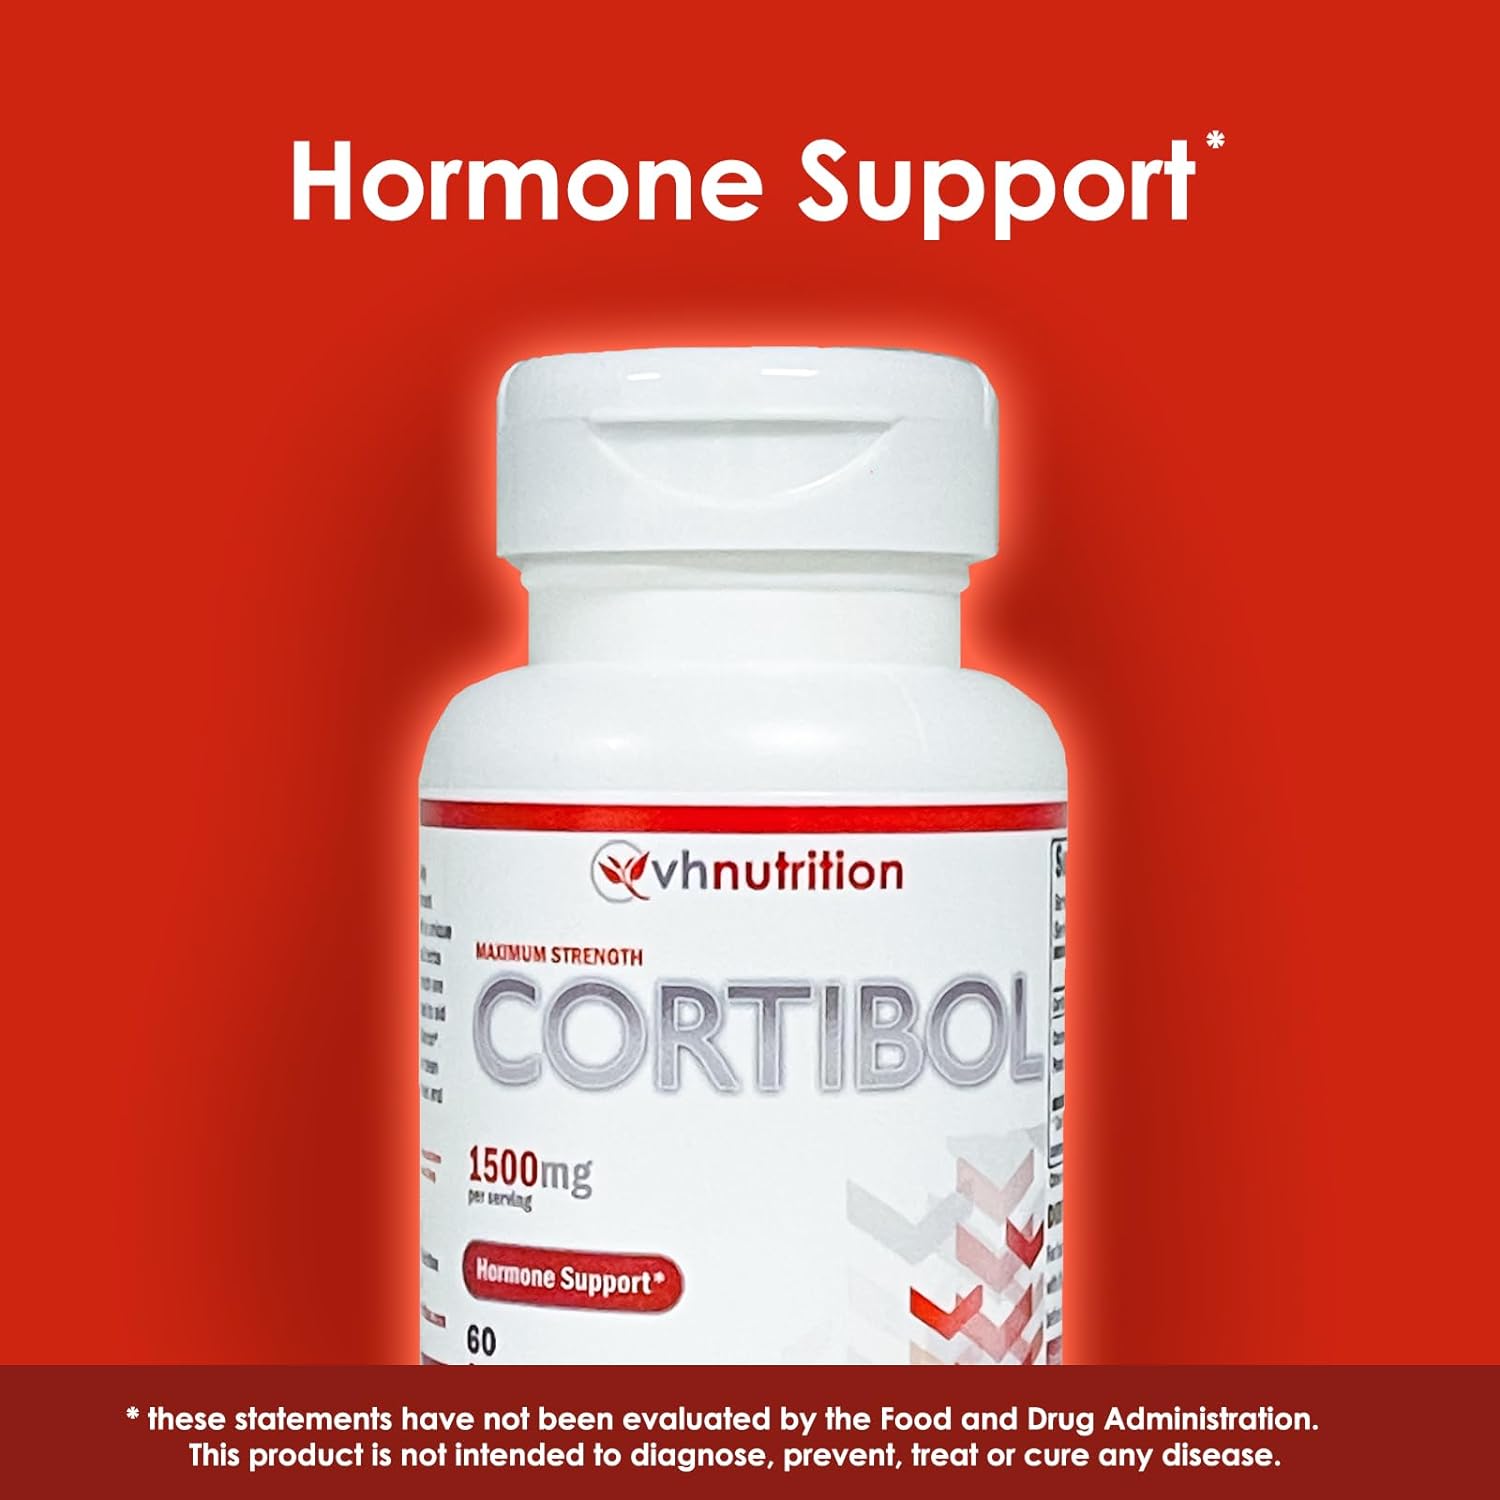 VH Nutrition CORTIBOL | Cortisol Manager* Supplement | Maximum Strength Adrenal Support* for Men and Women | Rhodiola, Cordyceps, and Eleuthero | 60 Capsules : Health & Household